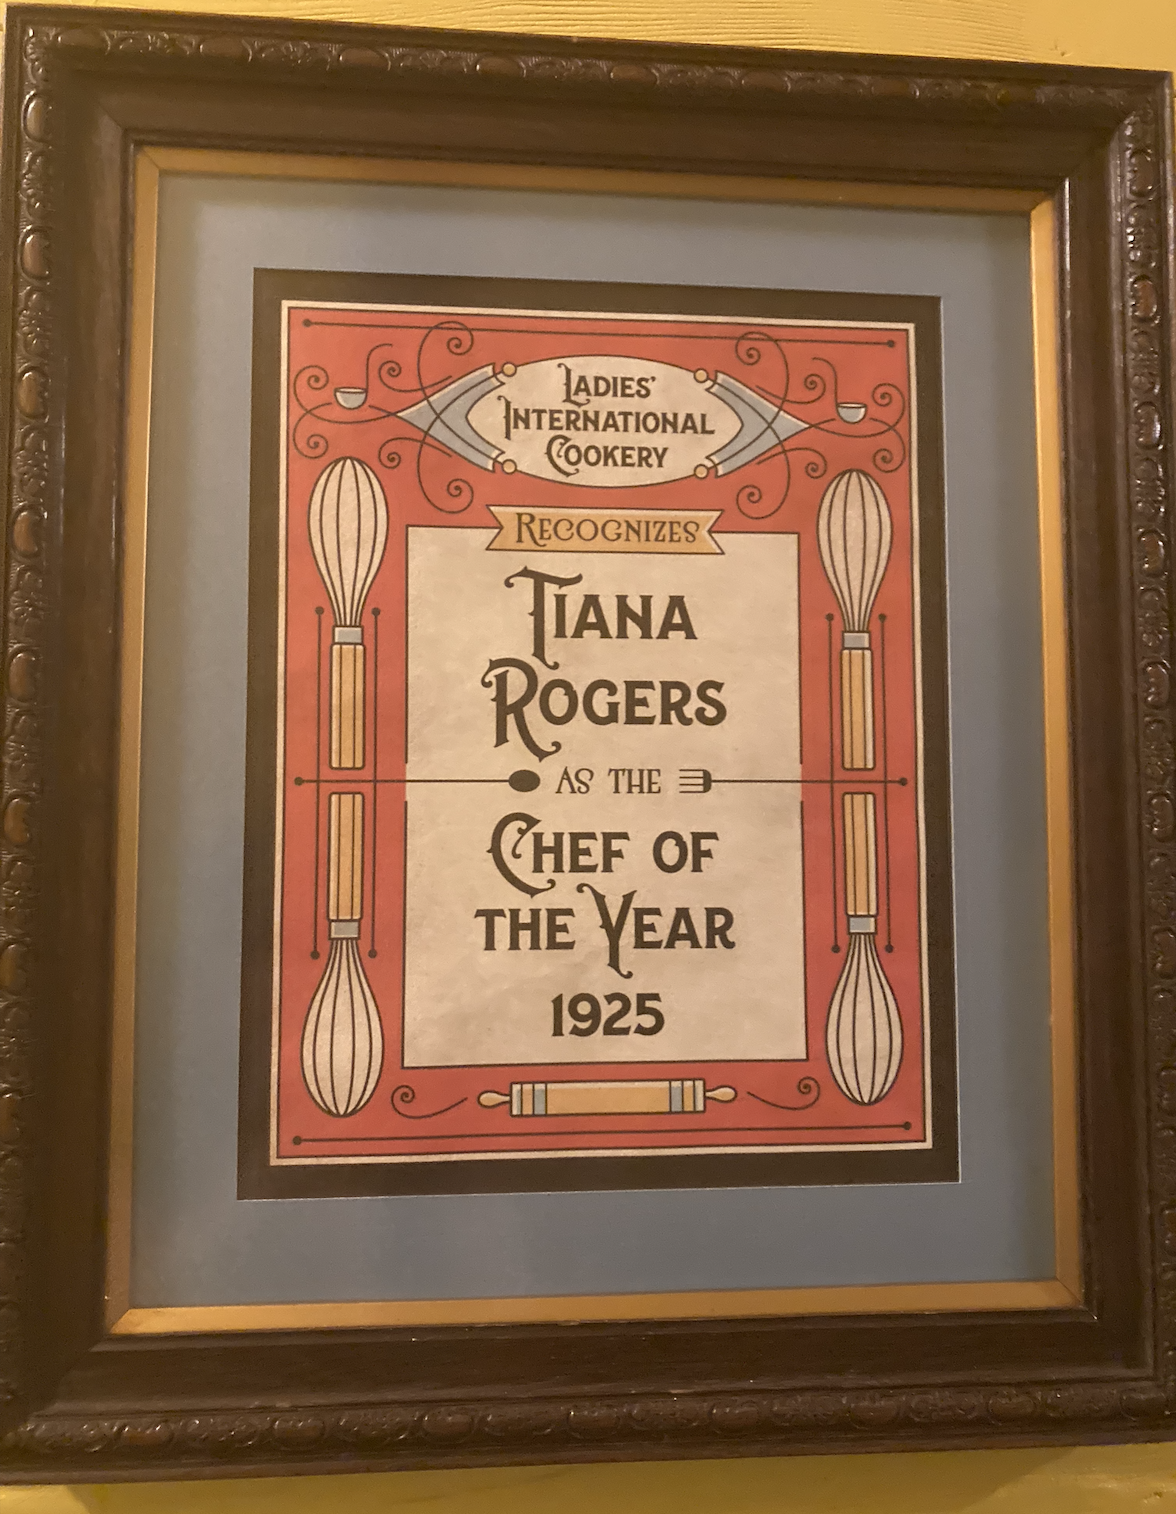 Framed certificate recognizing Tiana Rogers as the Chef of the Year 1925 from Ladies&#x27; International Cookery